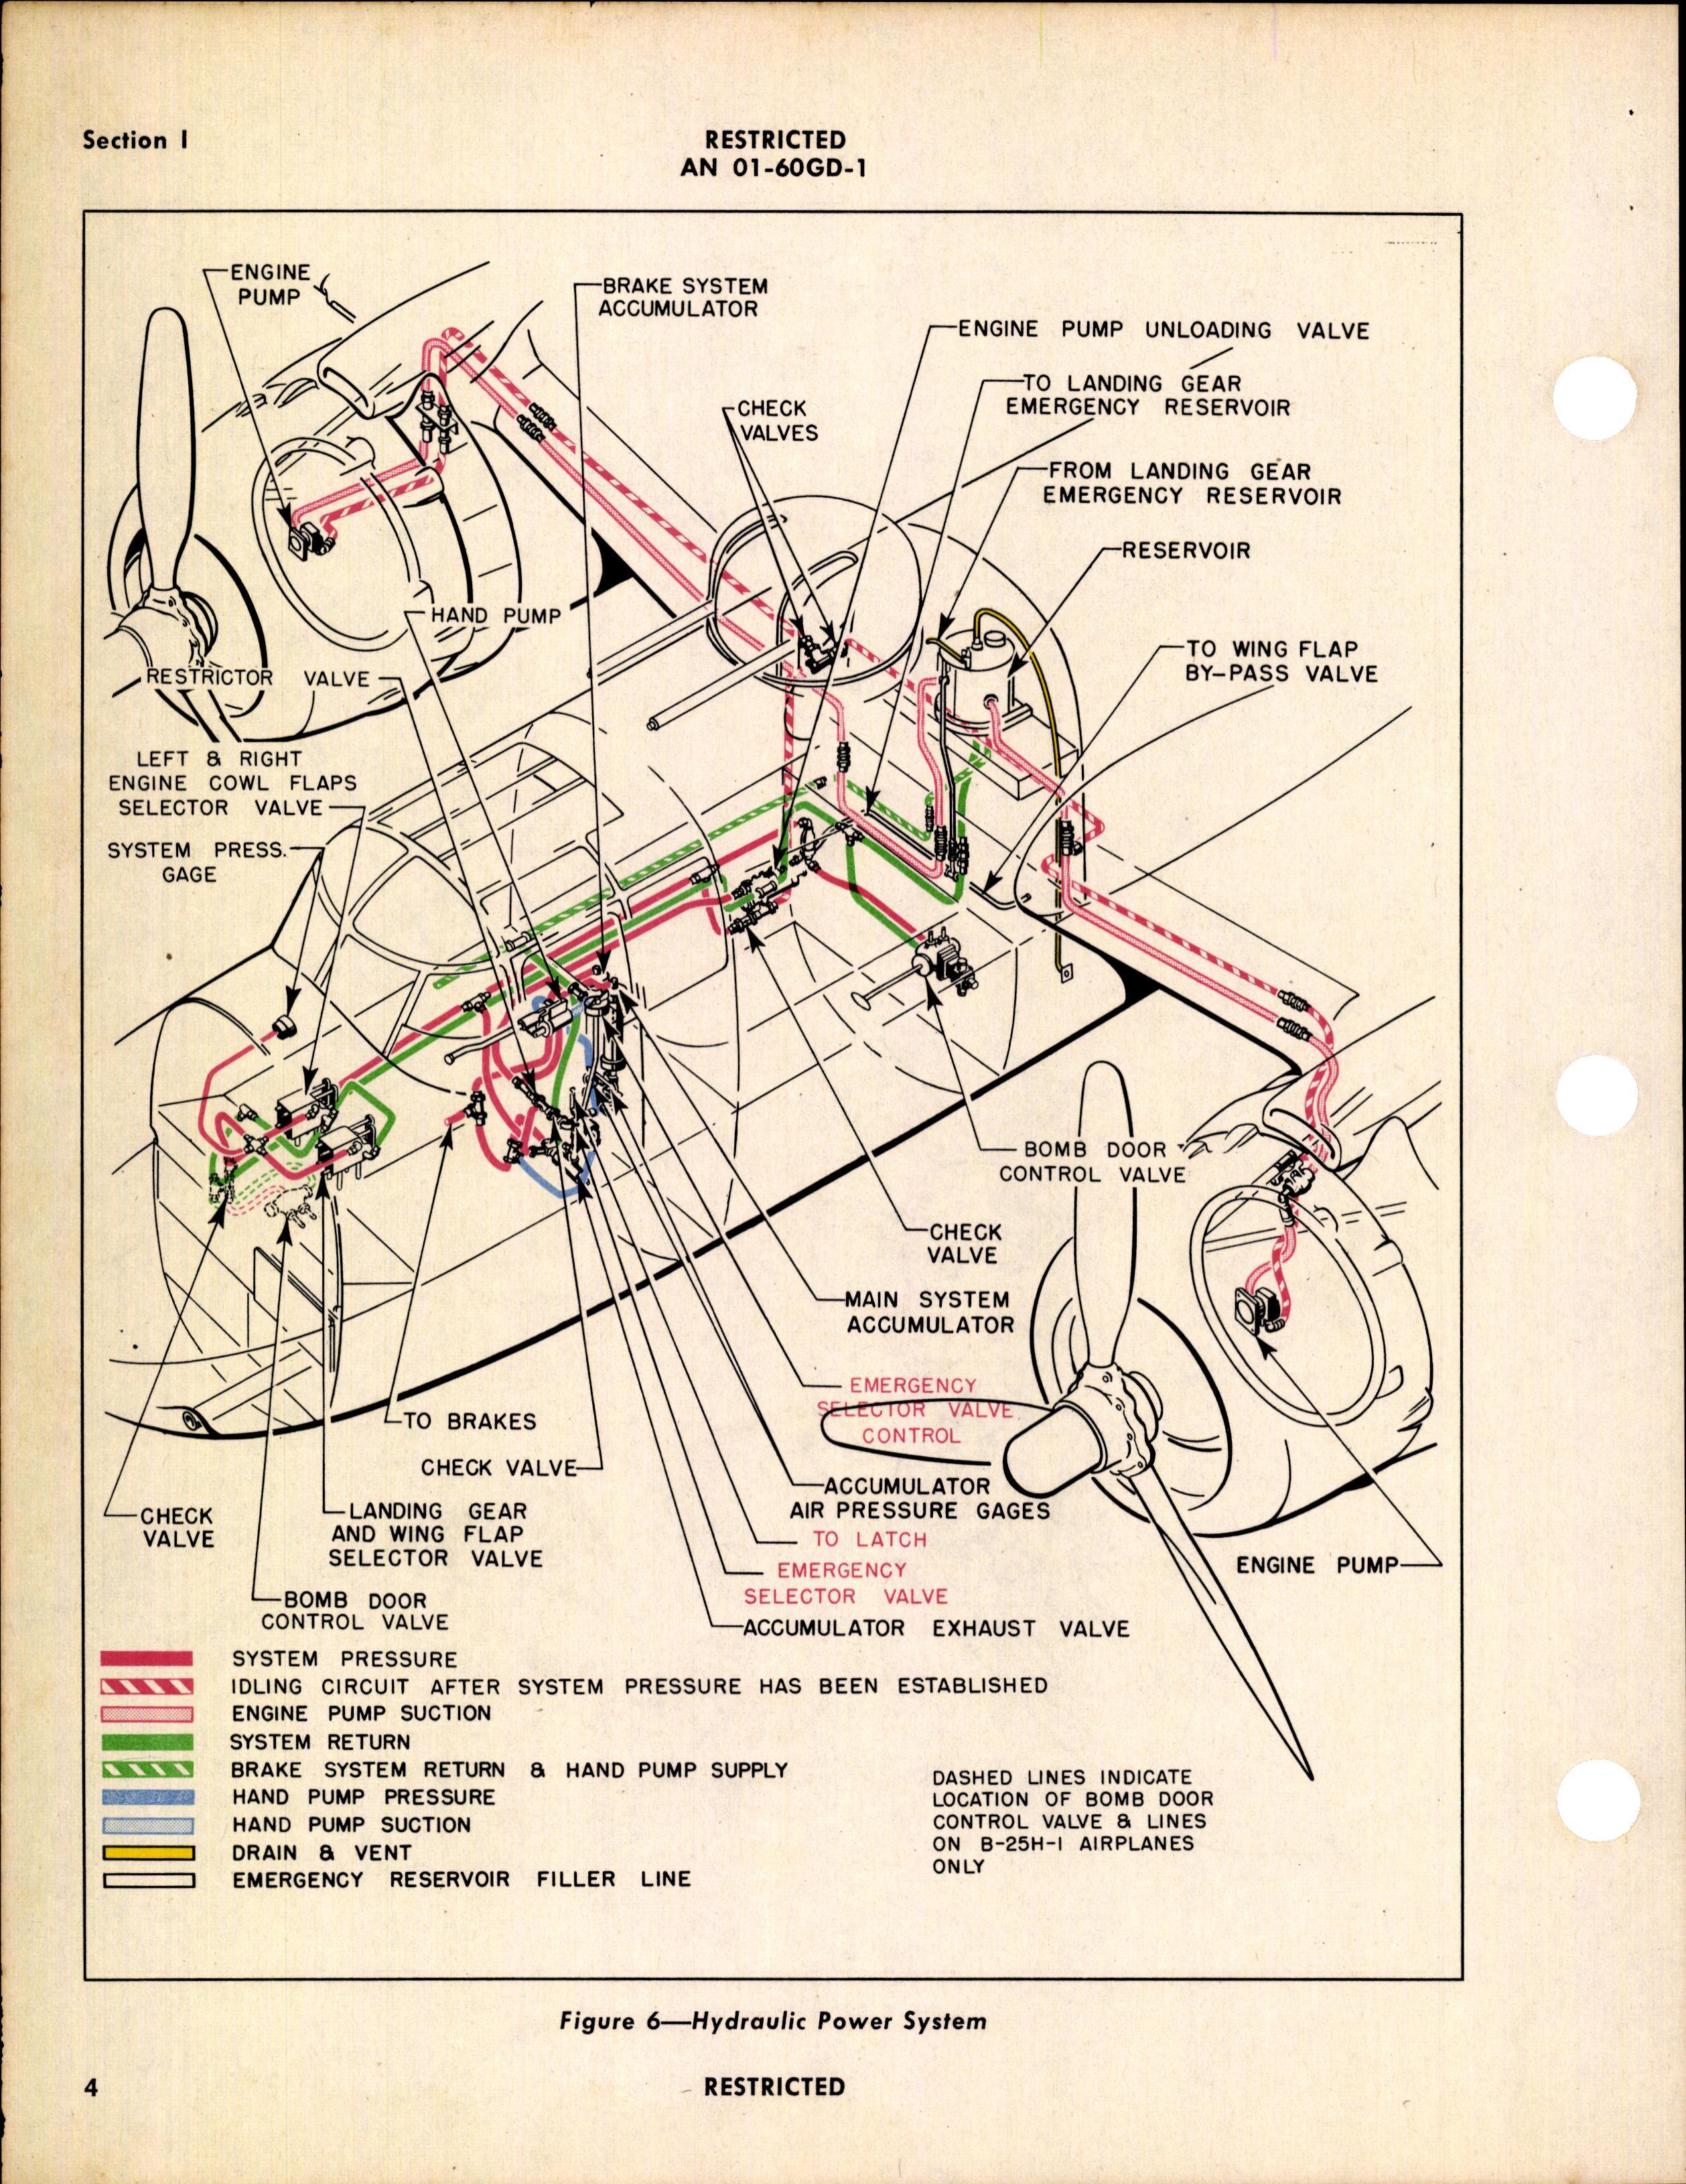 Sample page 8 from AirCorps Library document: Pilot's Flight Operating Instructions for B-25H and PBJ-1H Airplanes